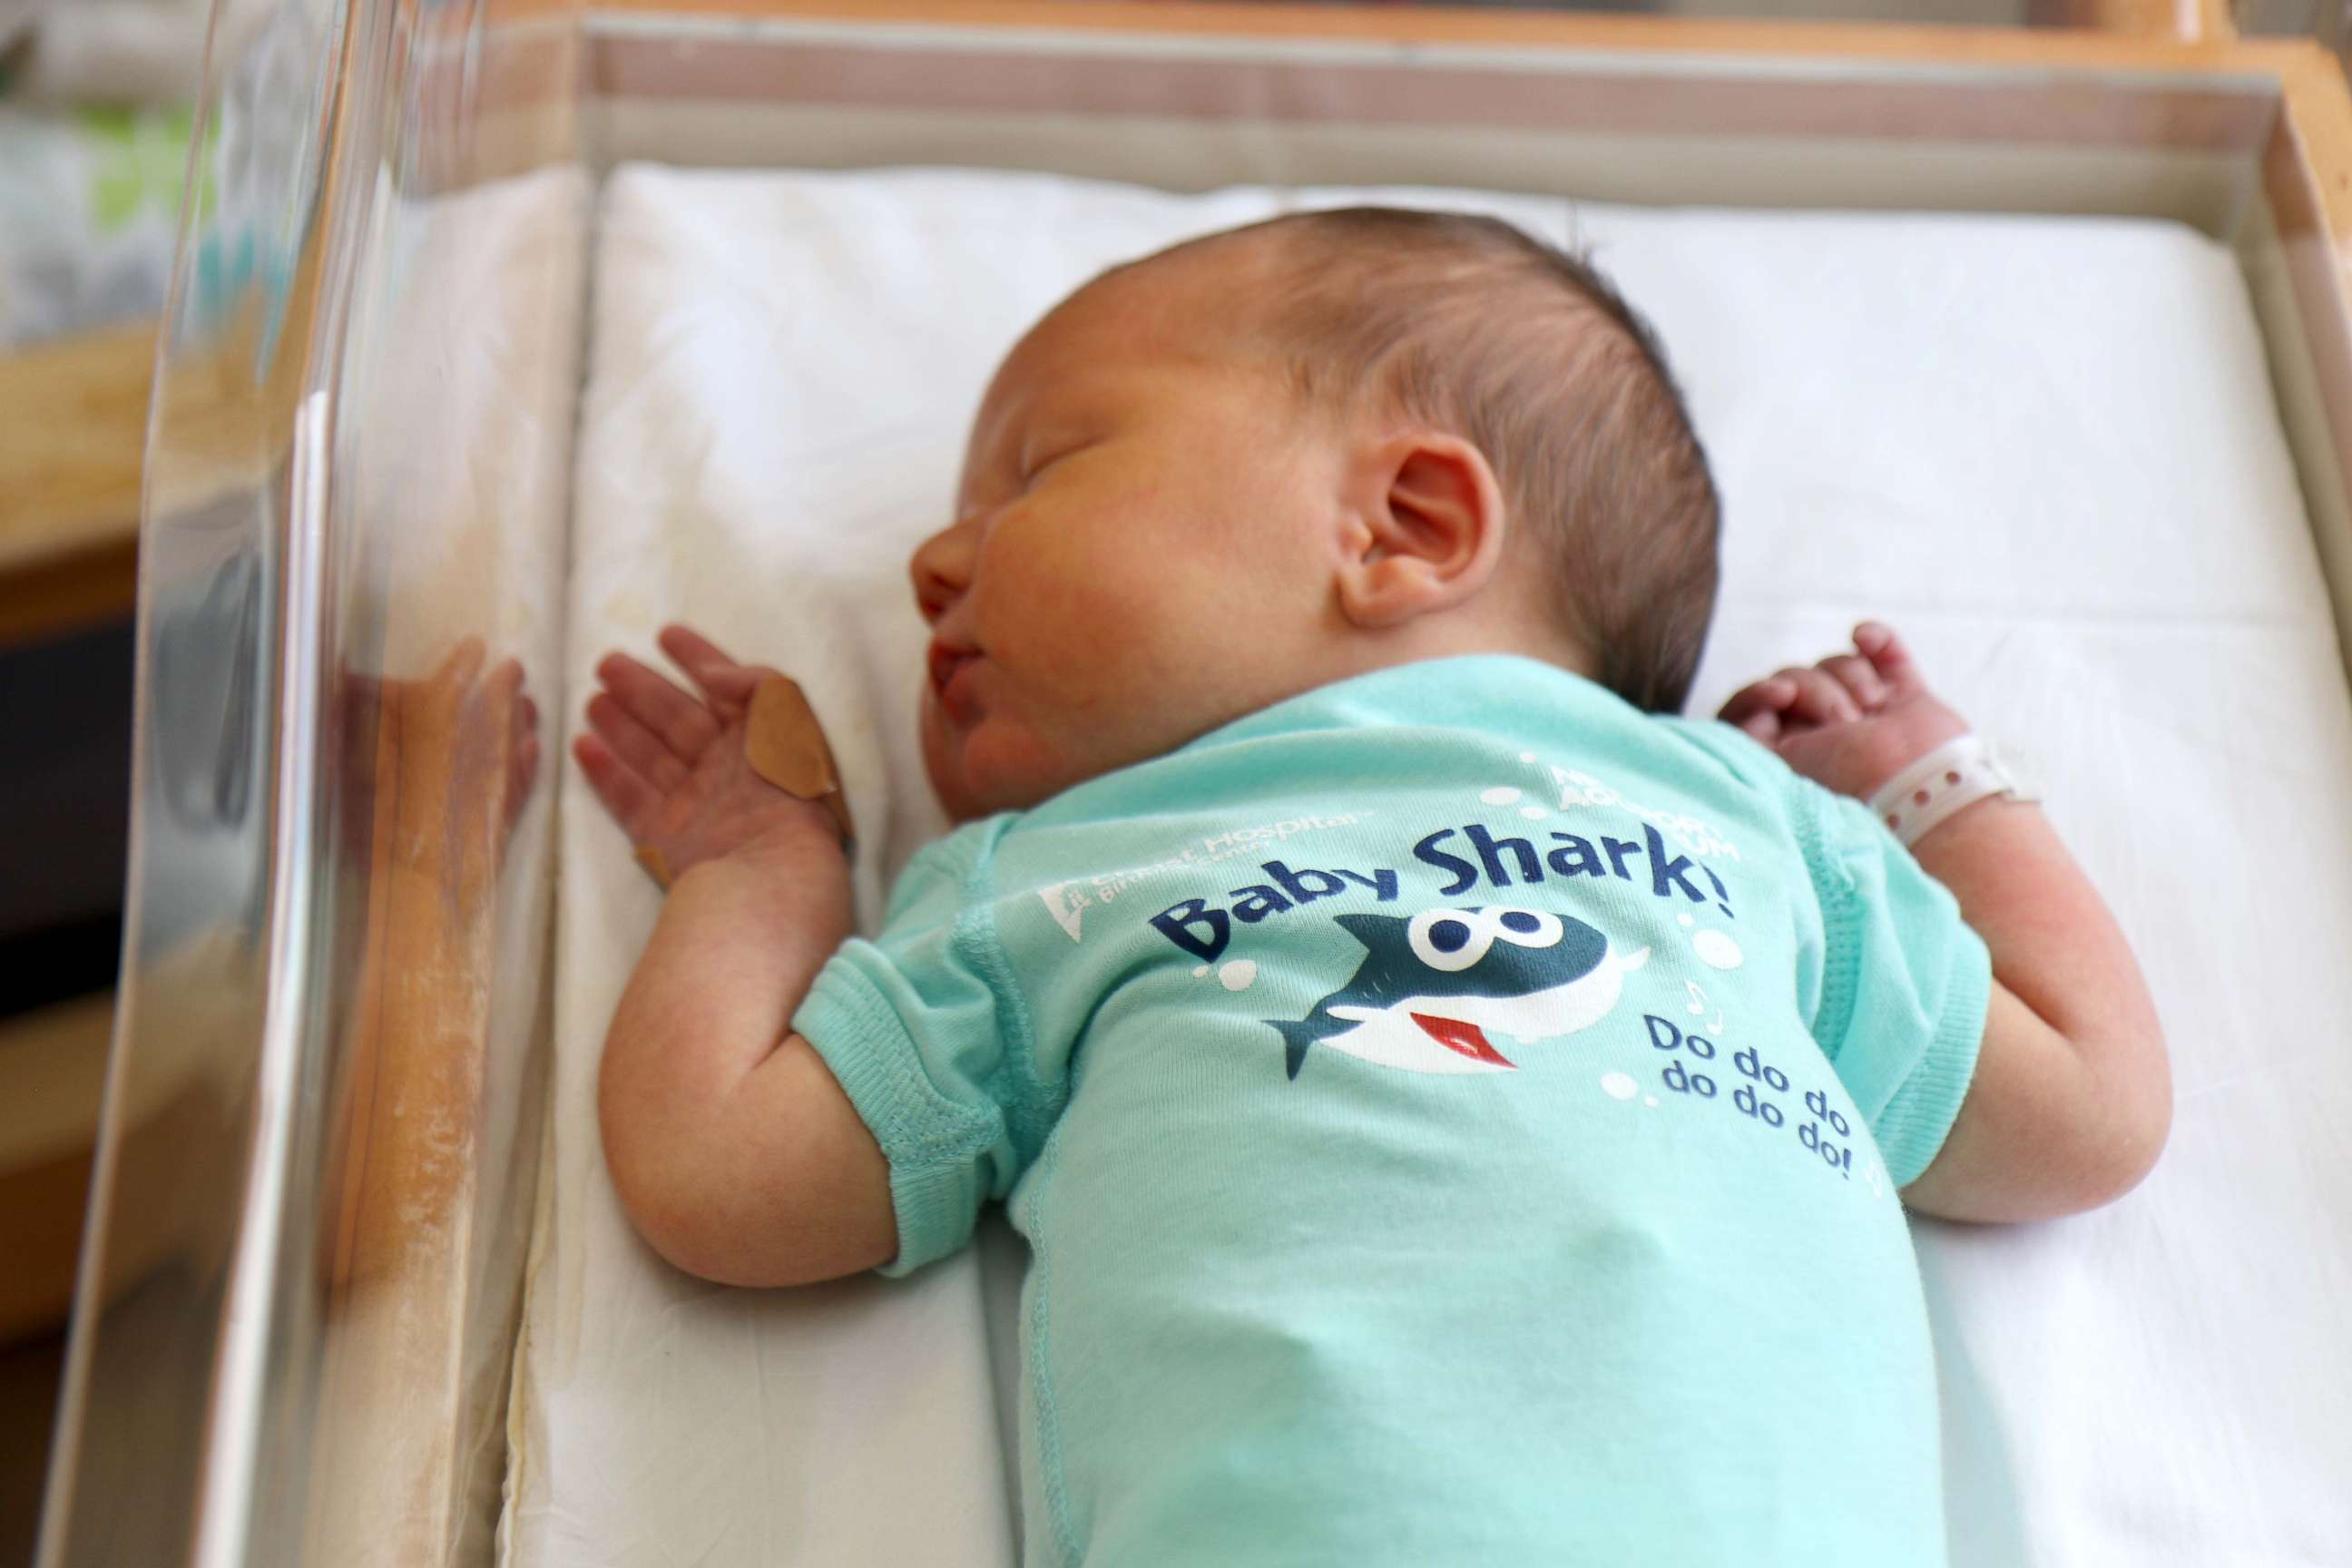 PHOTO: Babies born at the The Christ Hospital in Cincinnati, Ohio during shark week will be decked out in "Baby Shark" onesies.